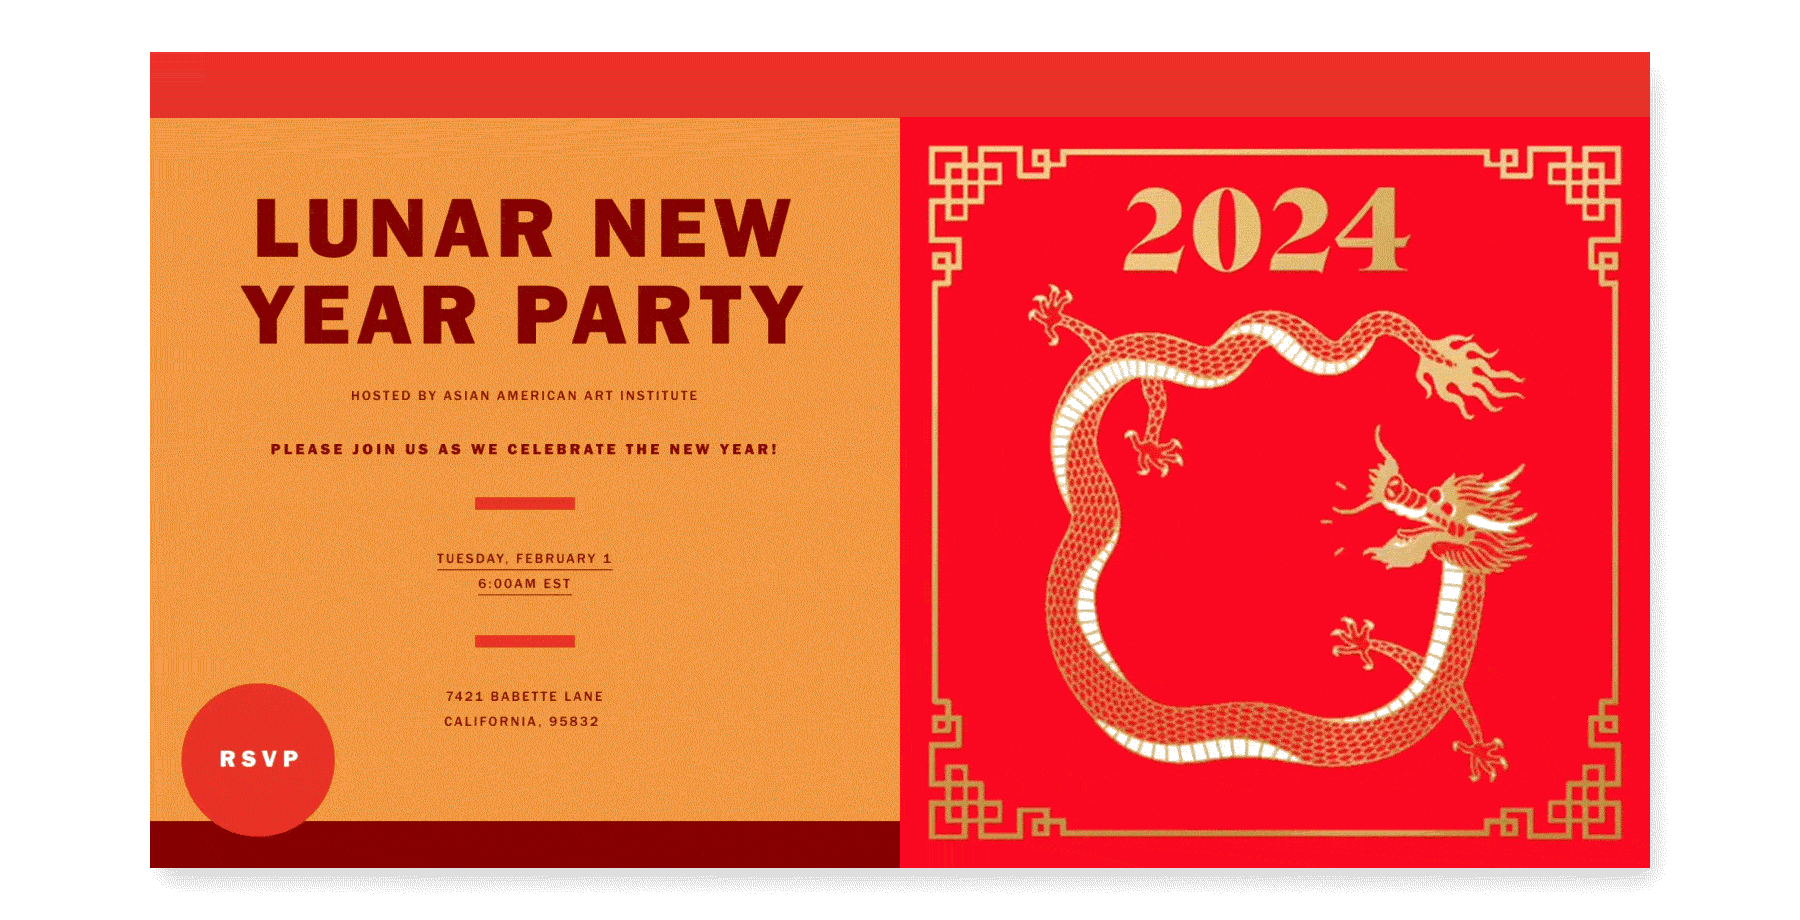 An animated flyer invitation featuring a golden dragon on a red background.